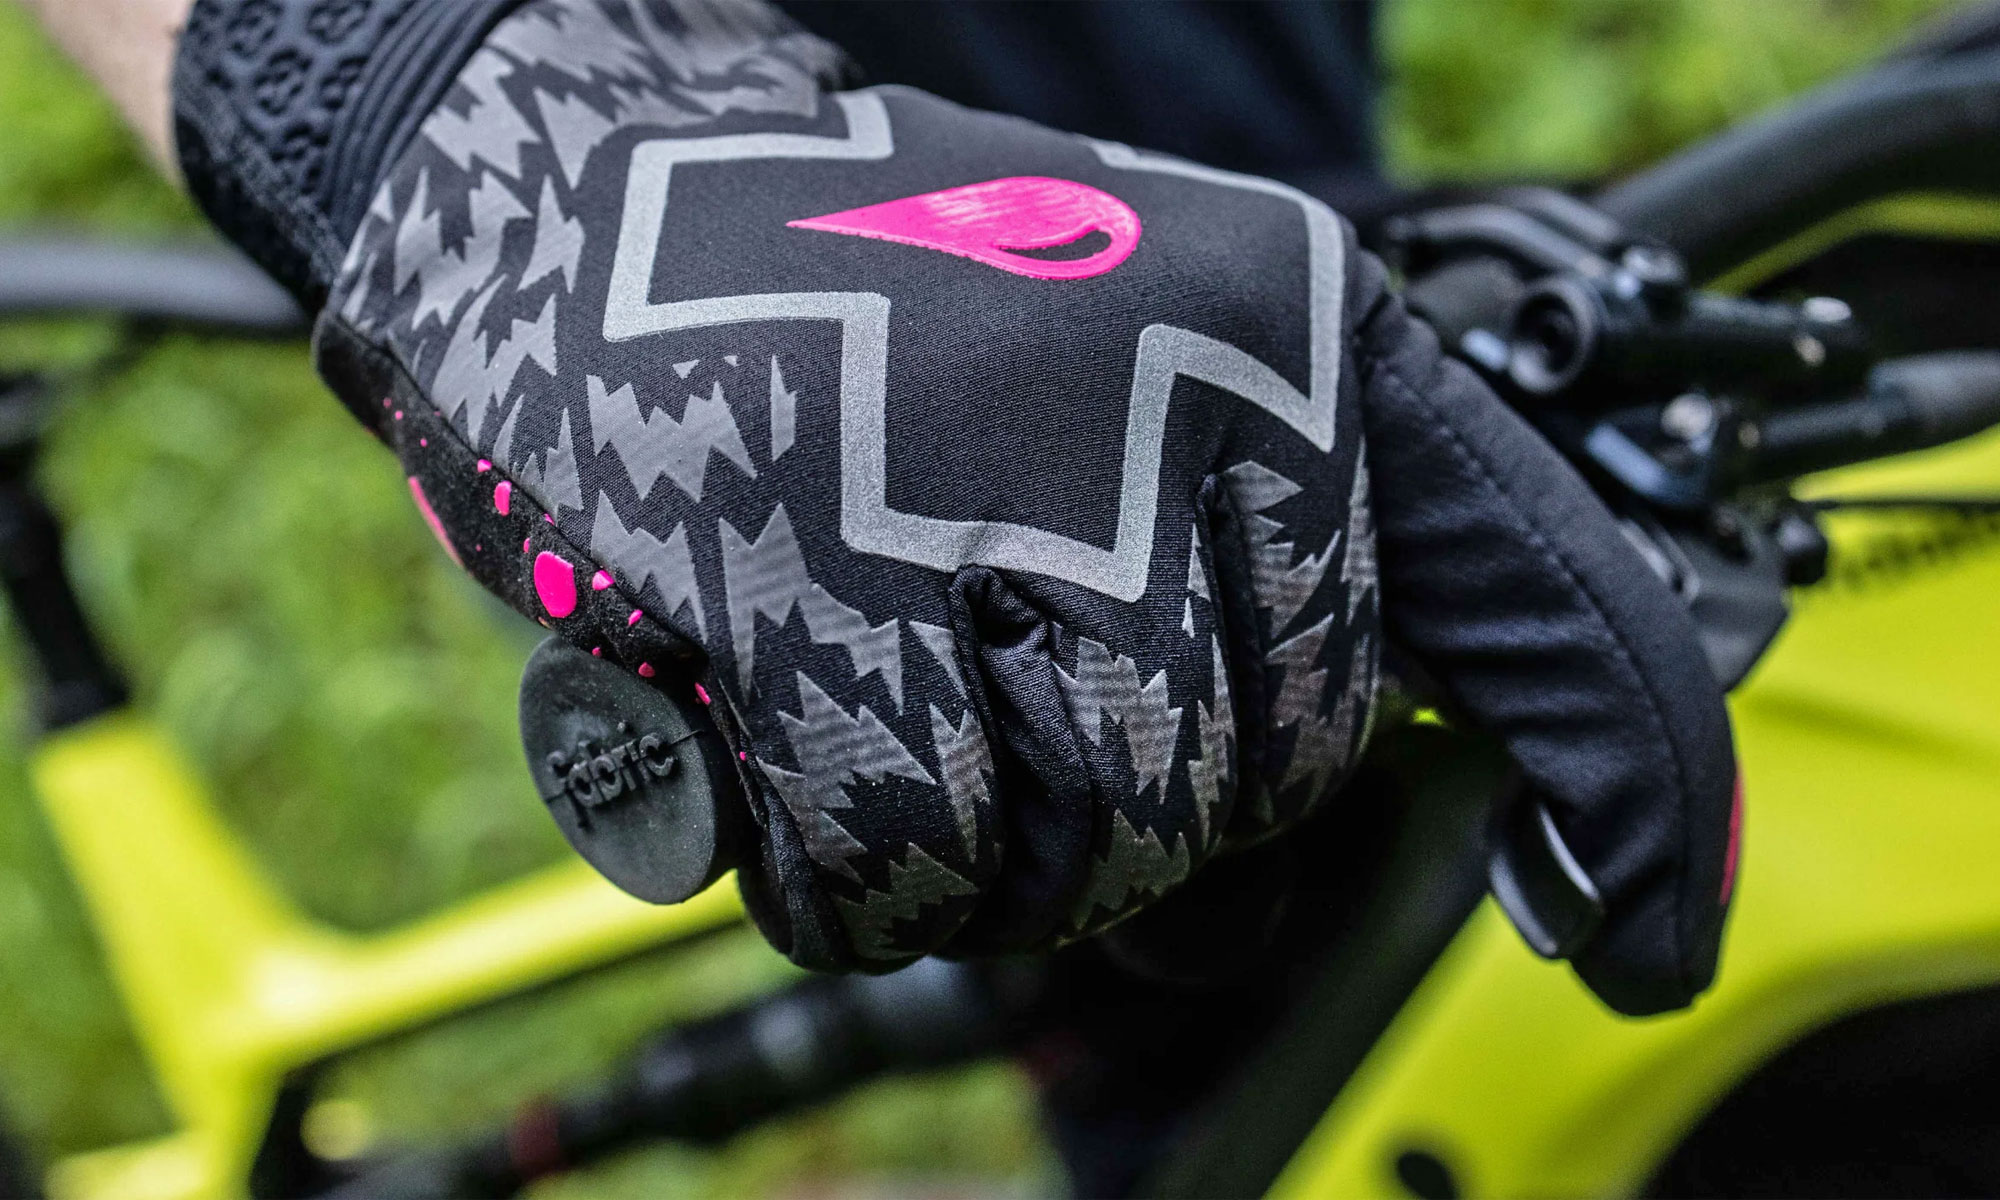 Muc-Off Winter Rider Gloves offer Thinsulate insulation for MTB weather protection, up close